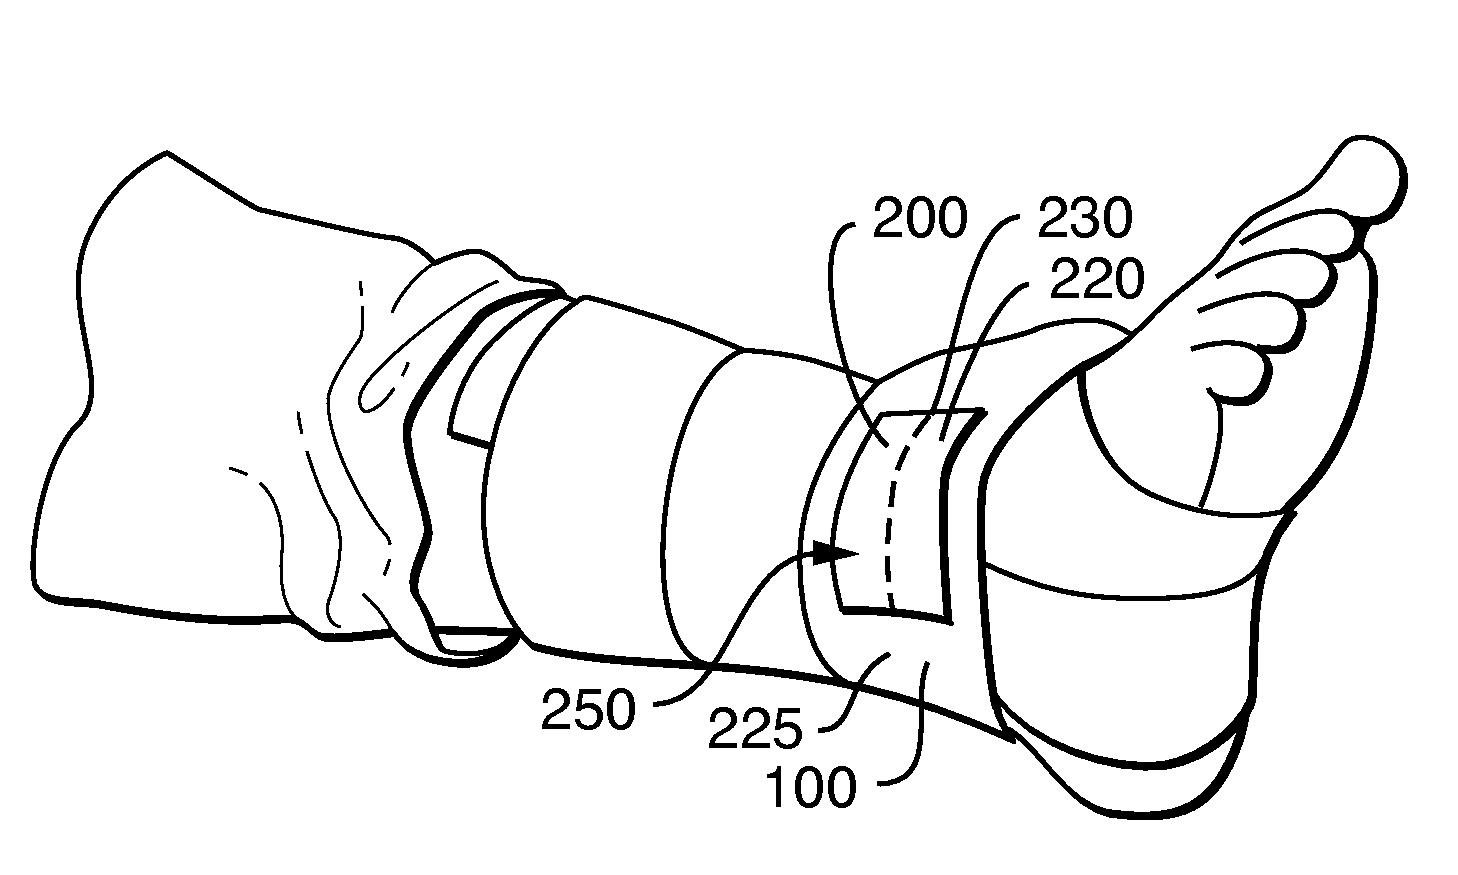 Wearable Article That Stiffens Upon Sudden Force